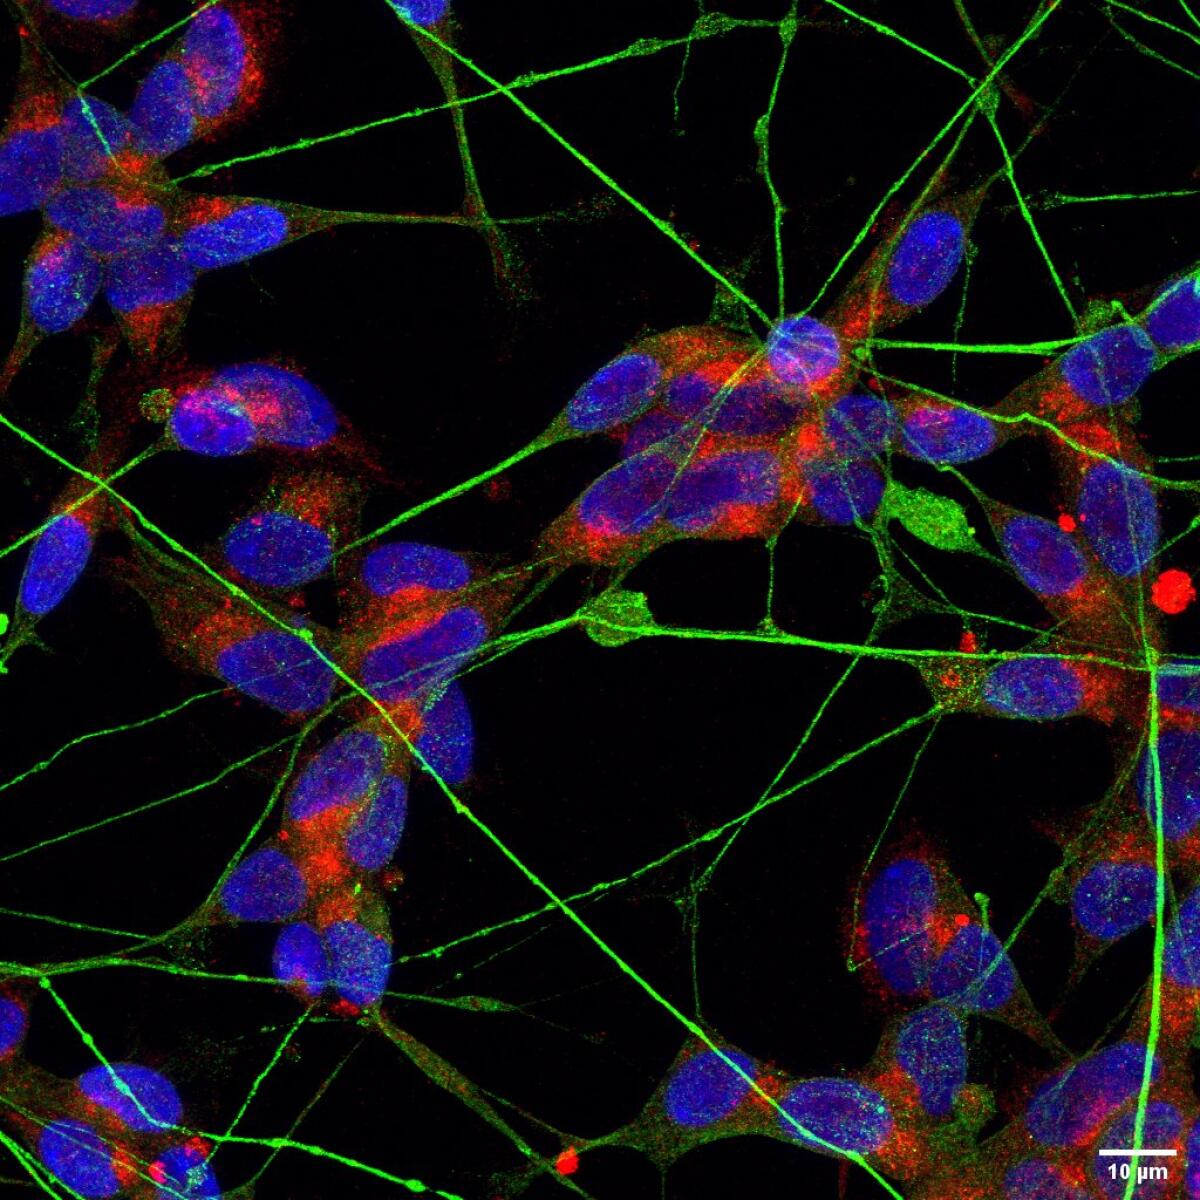 A group of neurons (blue) and the dendrites that connect them (green). The coronavirus' ACE2 receptor is in red.